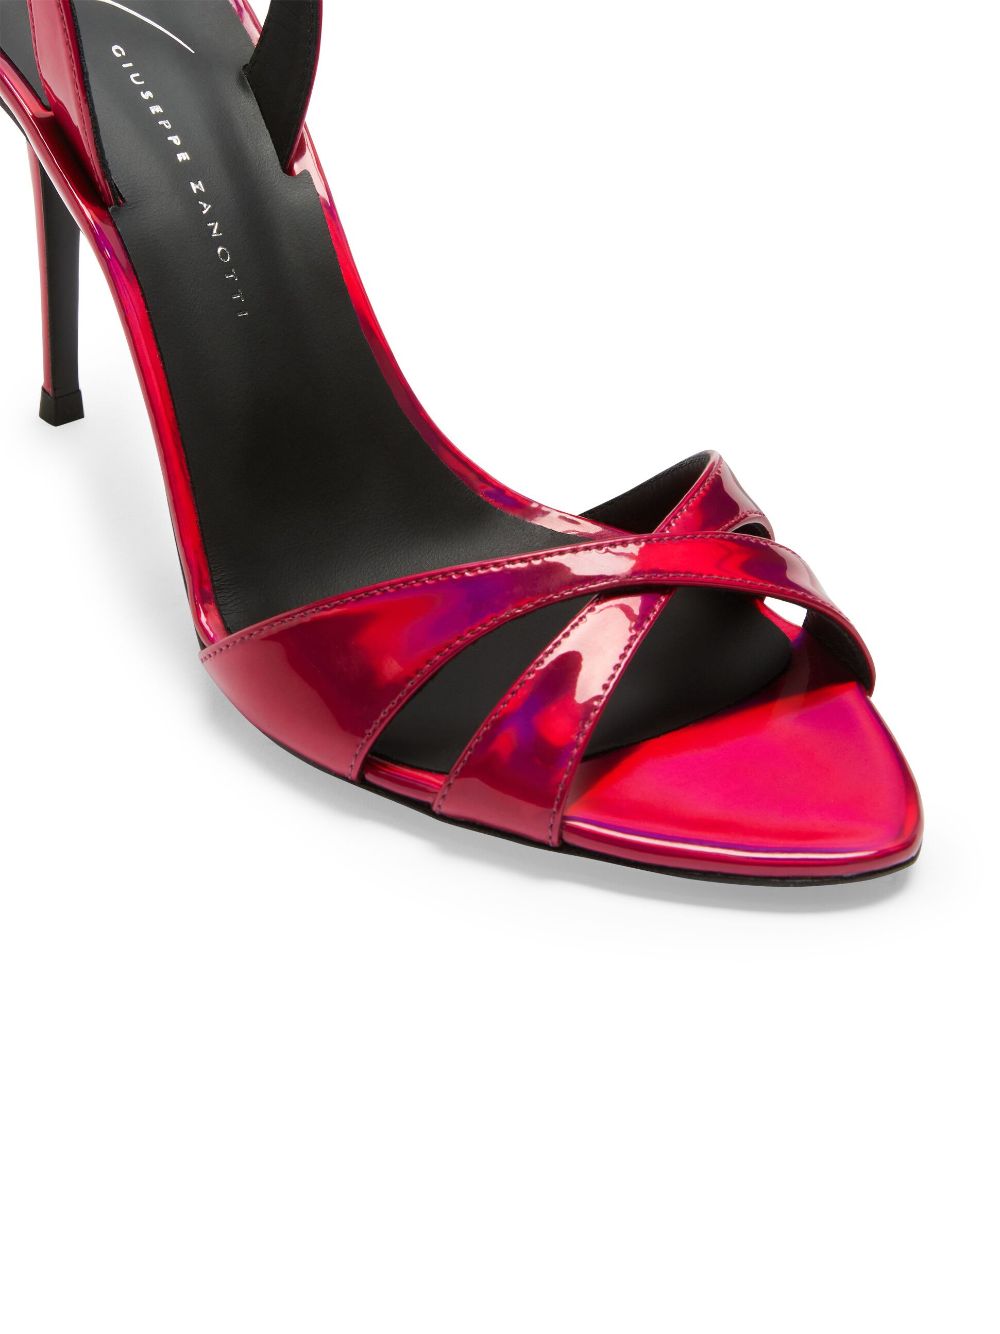 Shop Giuseppe Zanotti Dorotee 90mm Leather Sandals In Pink